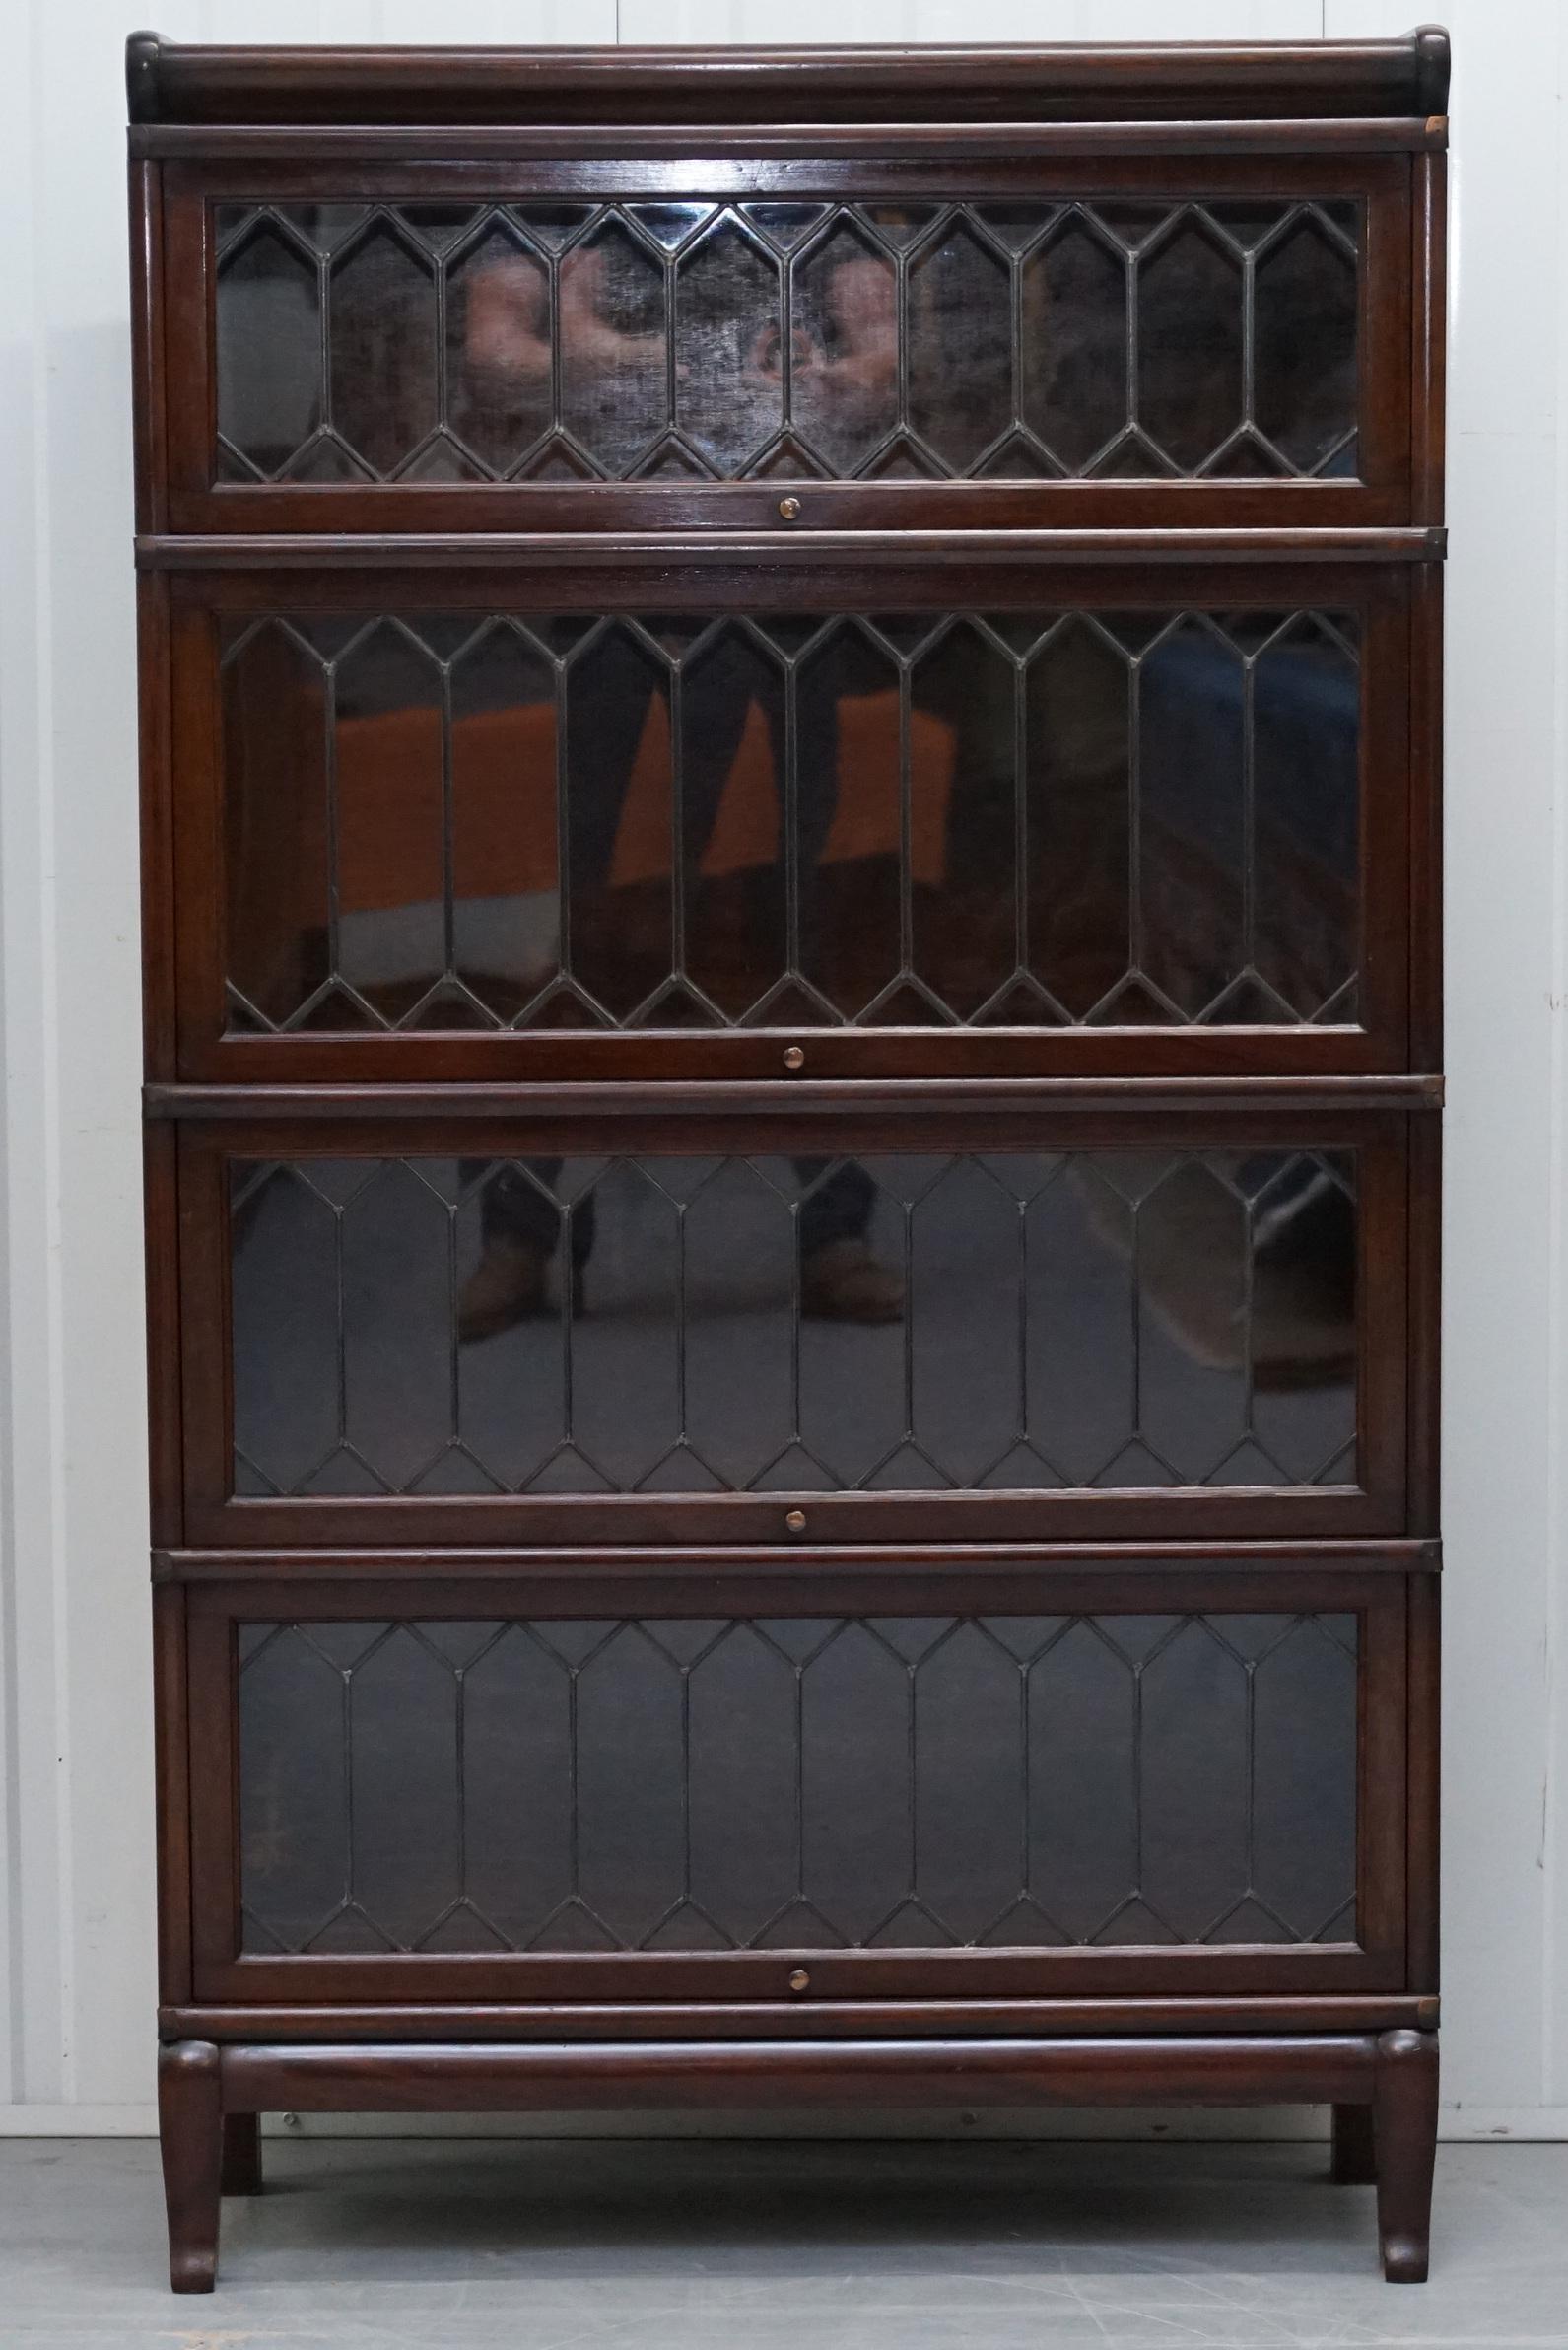 We are delighted to offer for sale this stunning original circa 1900 Globe Wernicke Mahogany with lead-lined glass stacking Legal Library bookcase

A very good looking well made and functional piece of furniture, these bookcases are highly